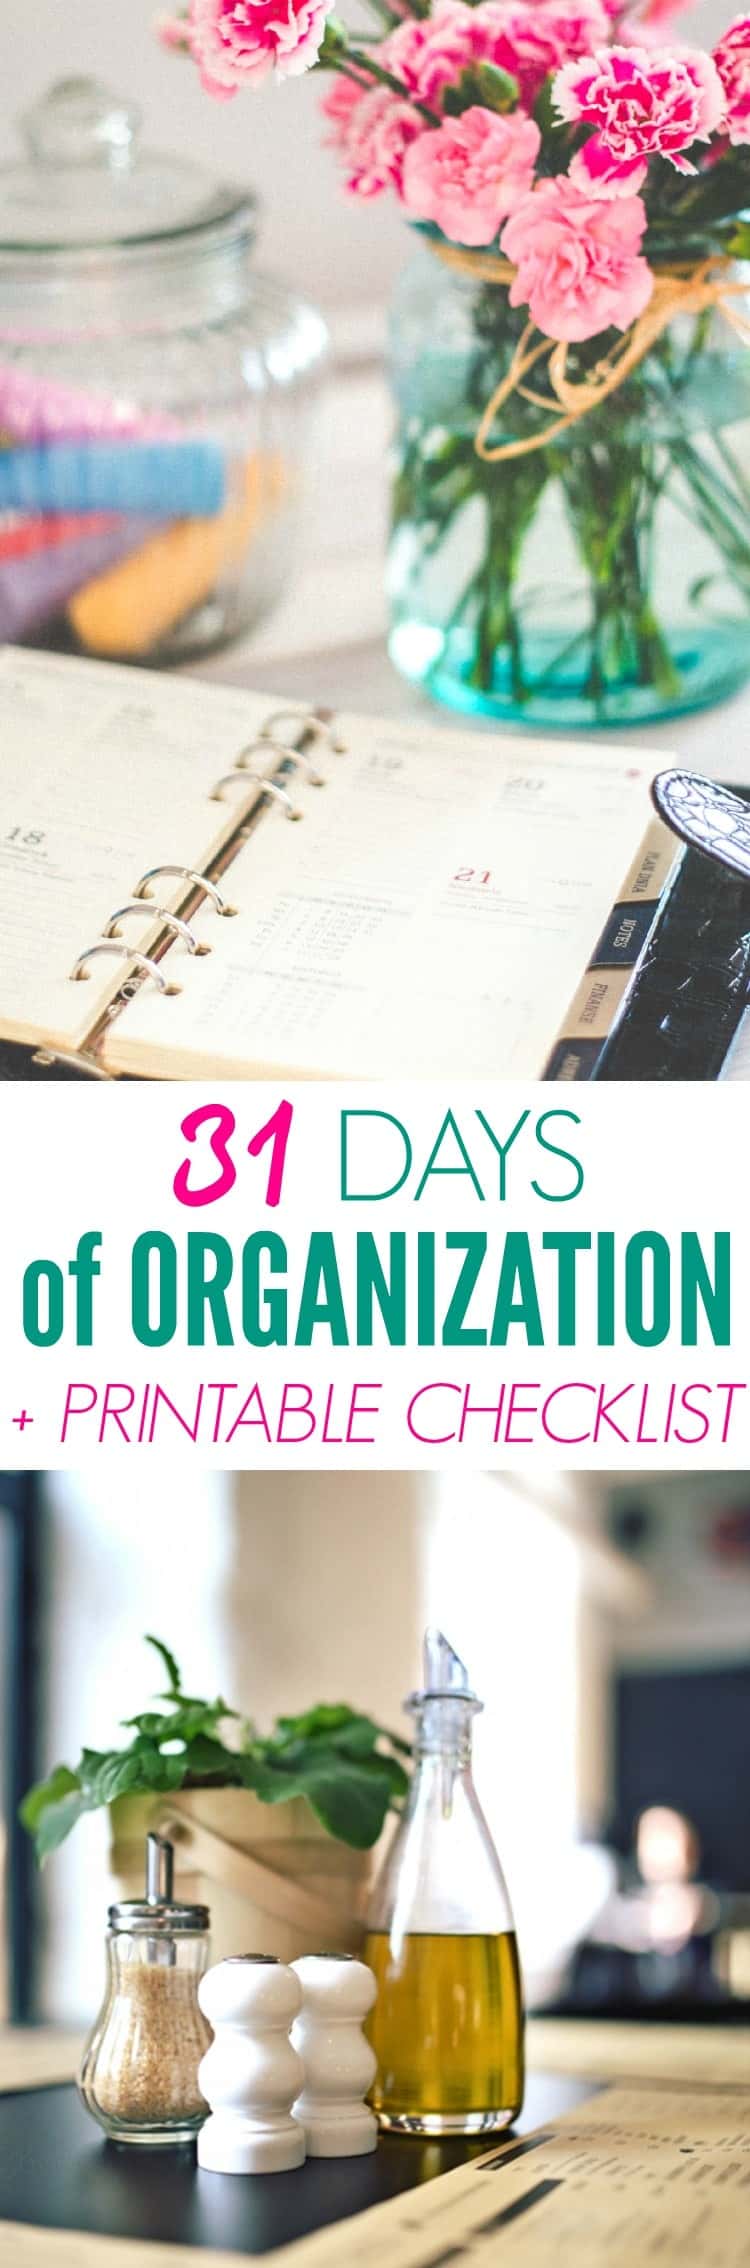 Use this FREE printable checklist to accomplish one small task each day for 31 Days of Organization!